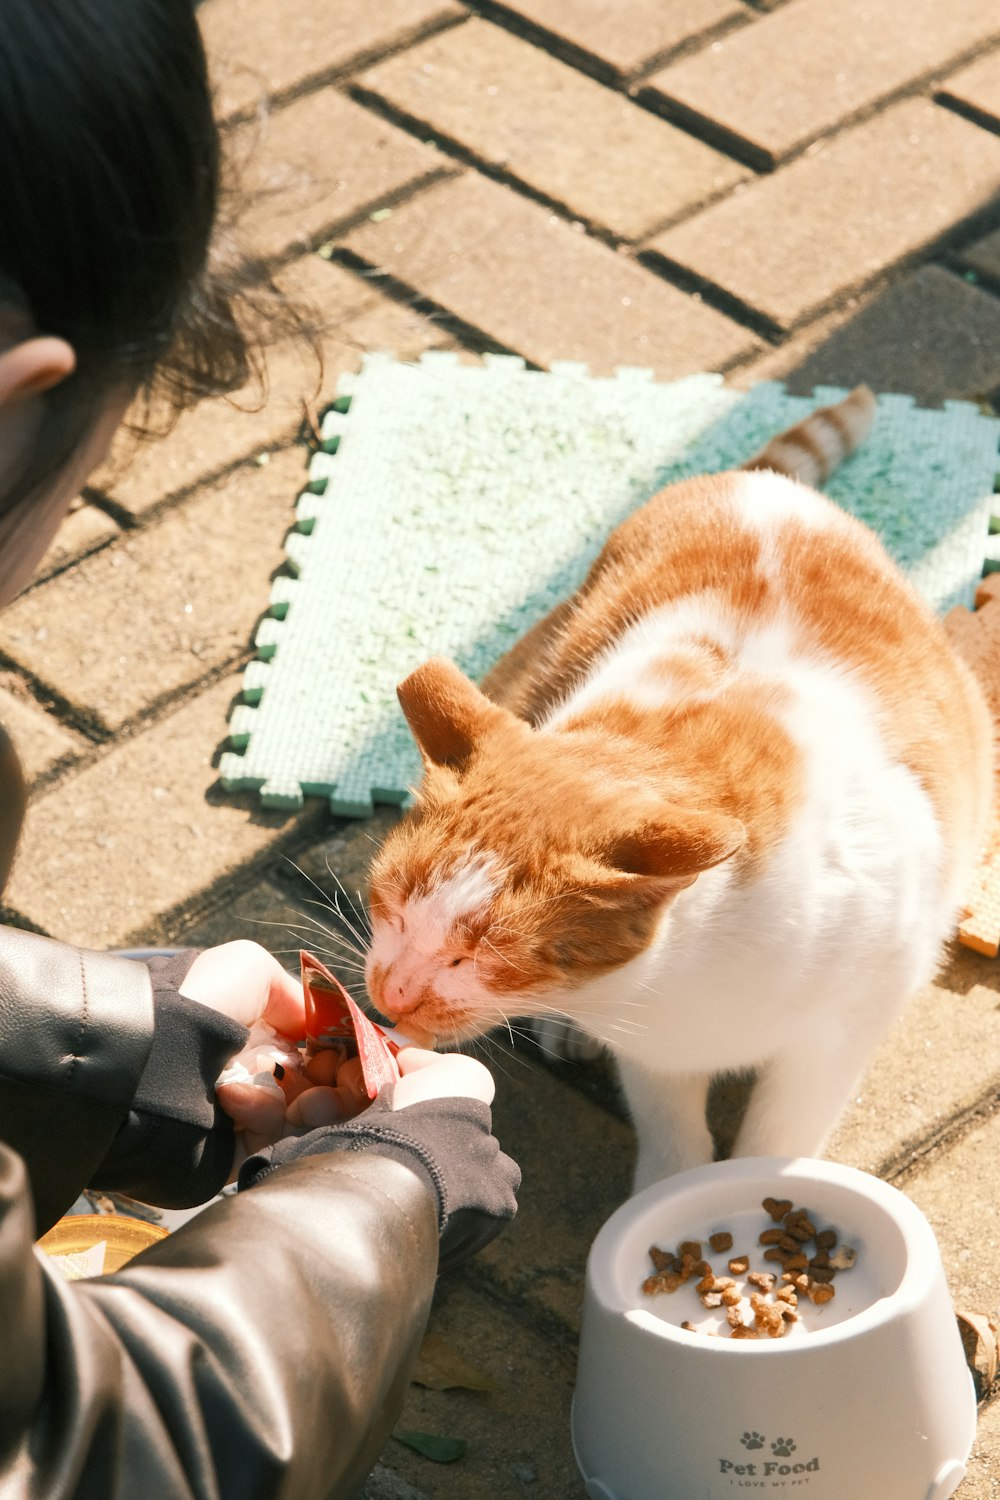 a cat eating food from a person's hand